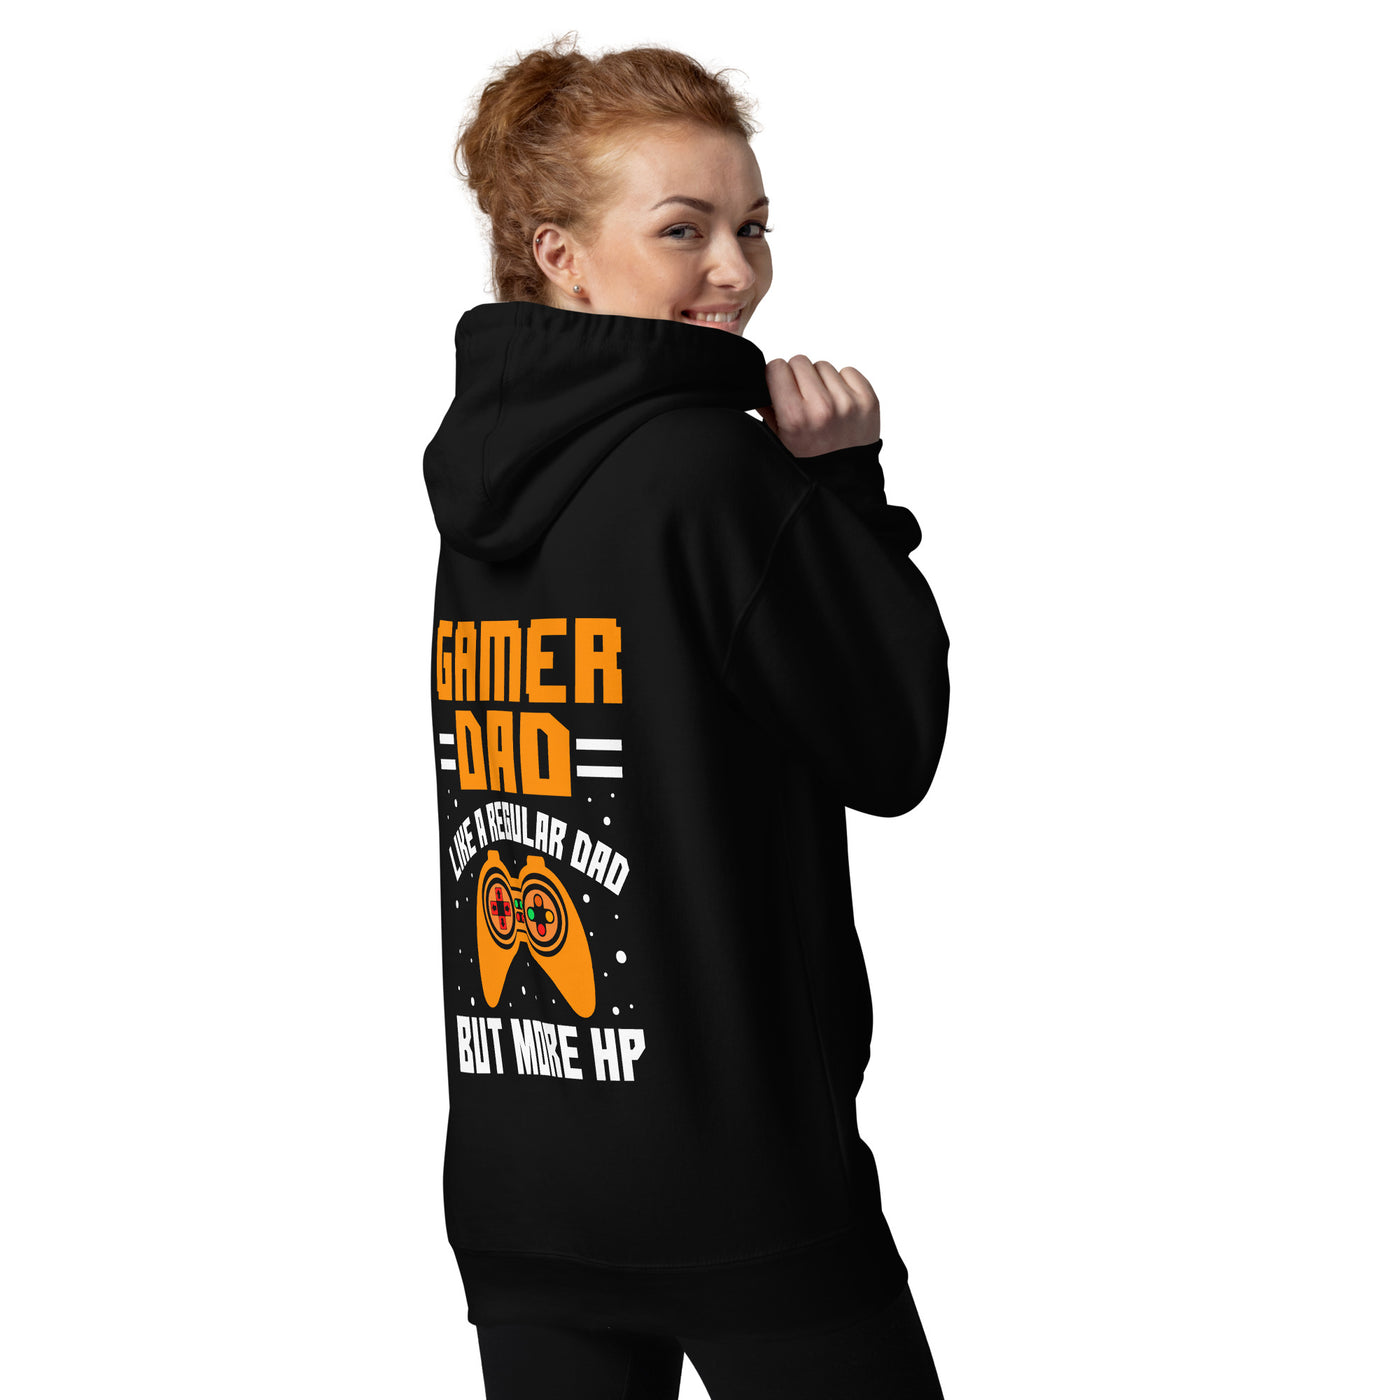 Gamer Dad like a normal one but more HP - Unisex Hoodie ( Back Print )